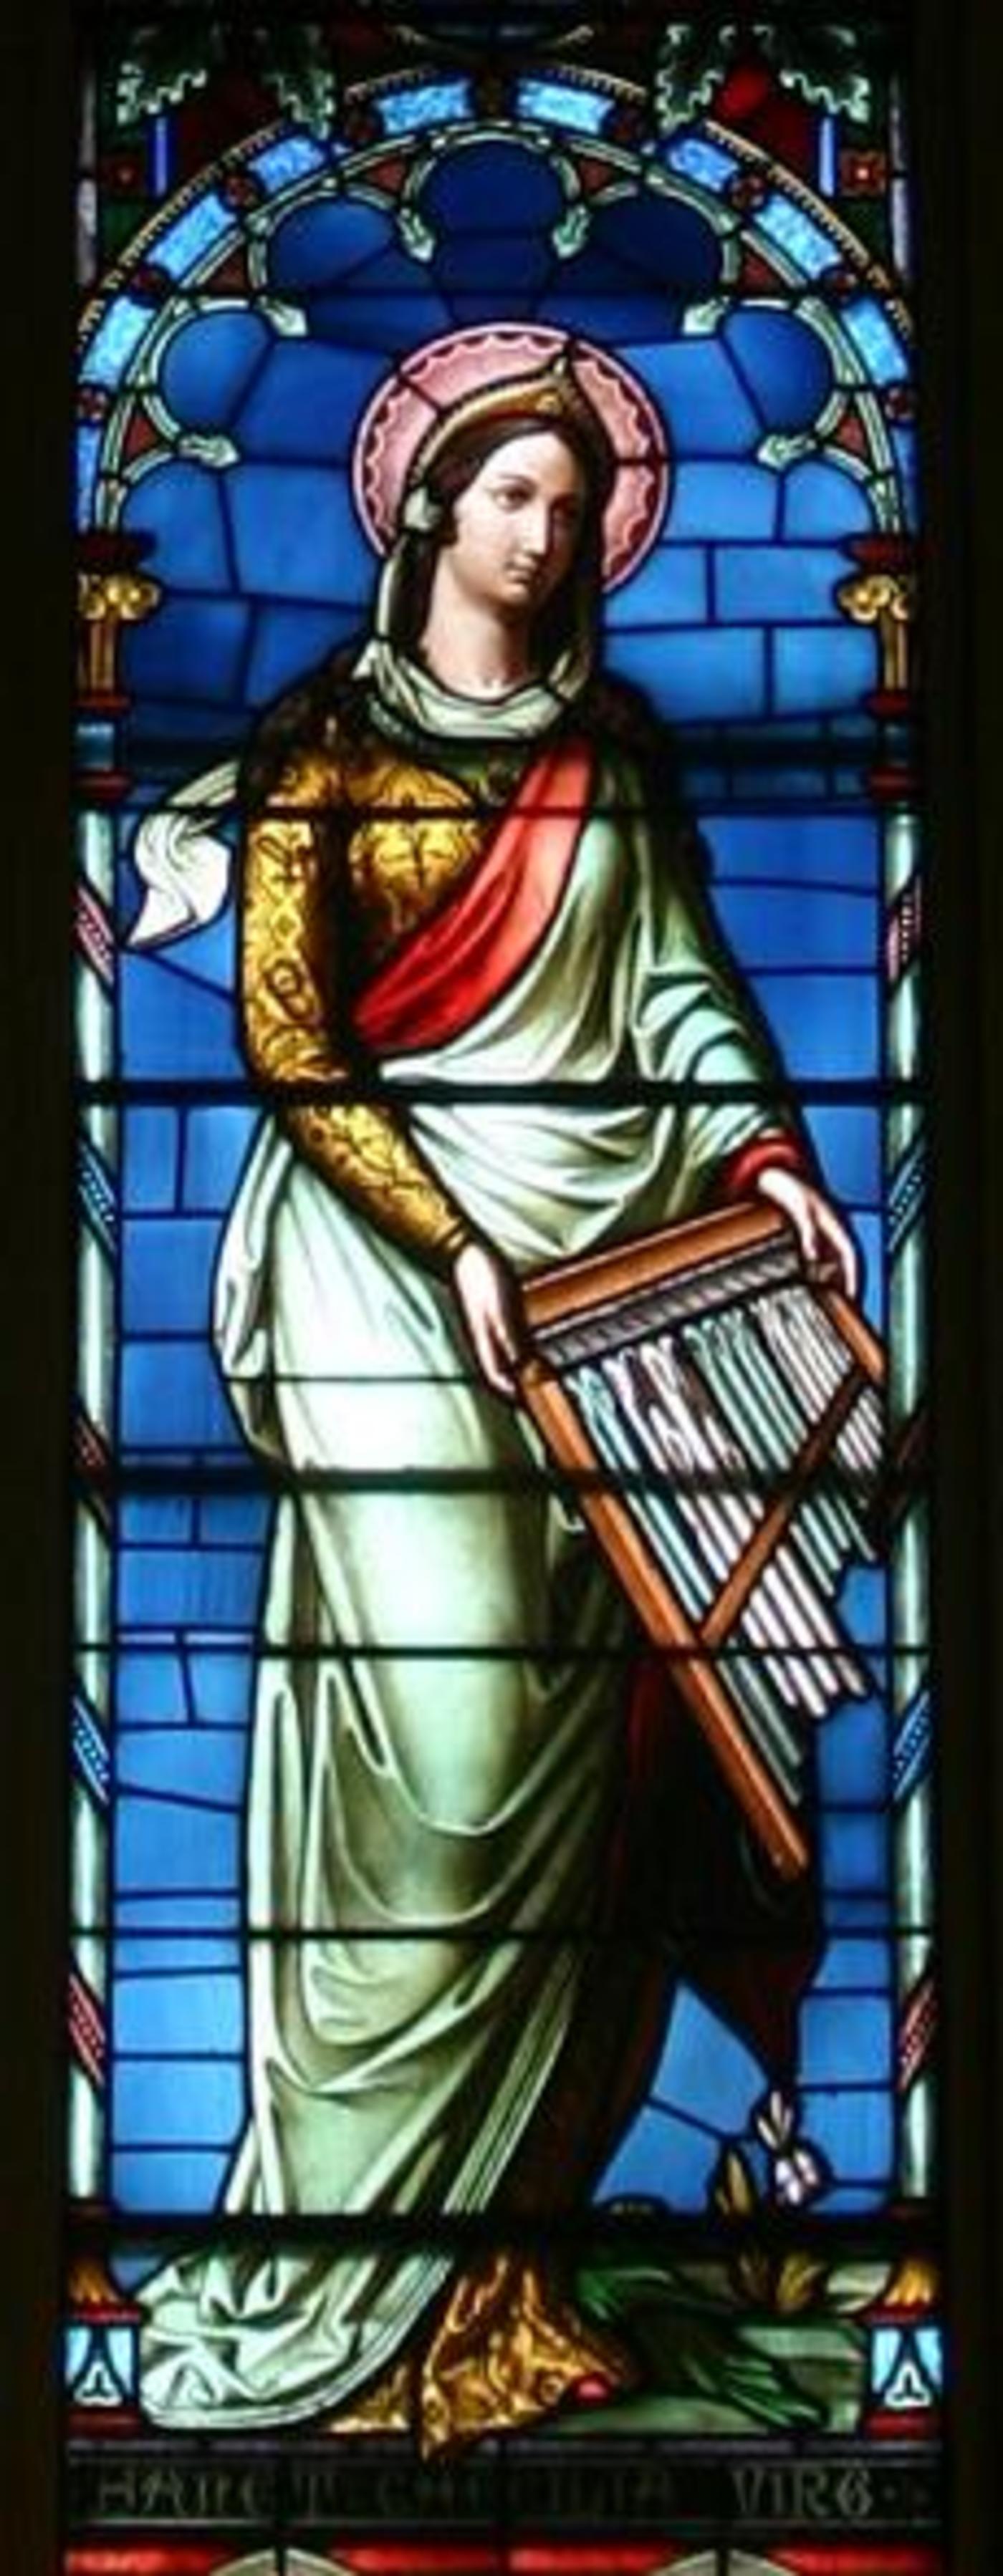 Window 15: St. Cecilia, Virgin and Martyr